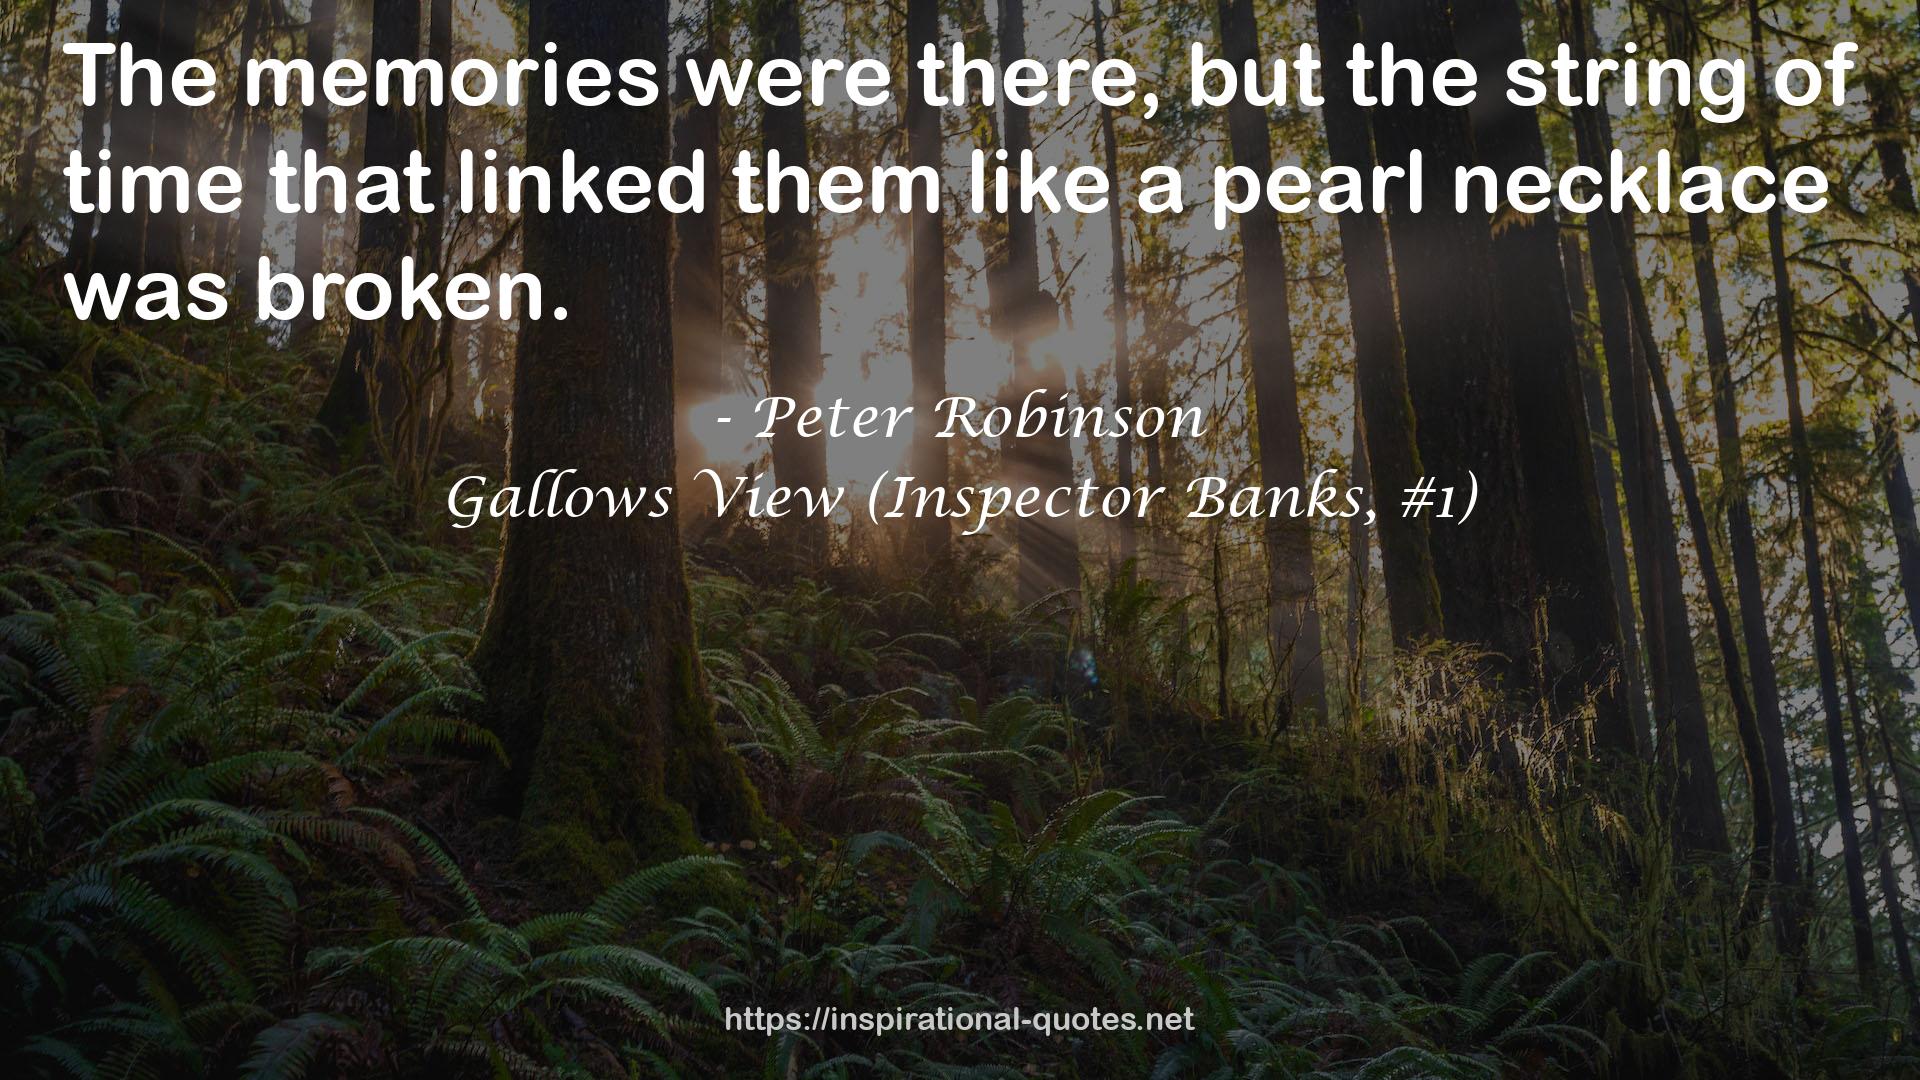 Gallows View (Inspector Banks, #1) QUOTES